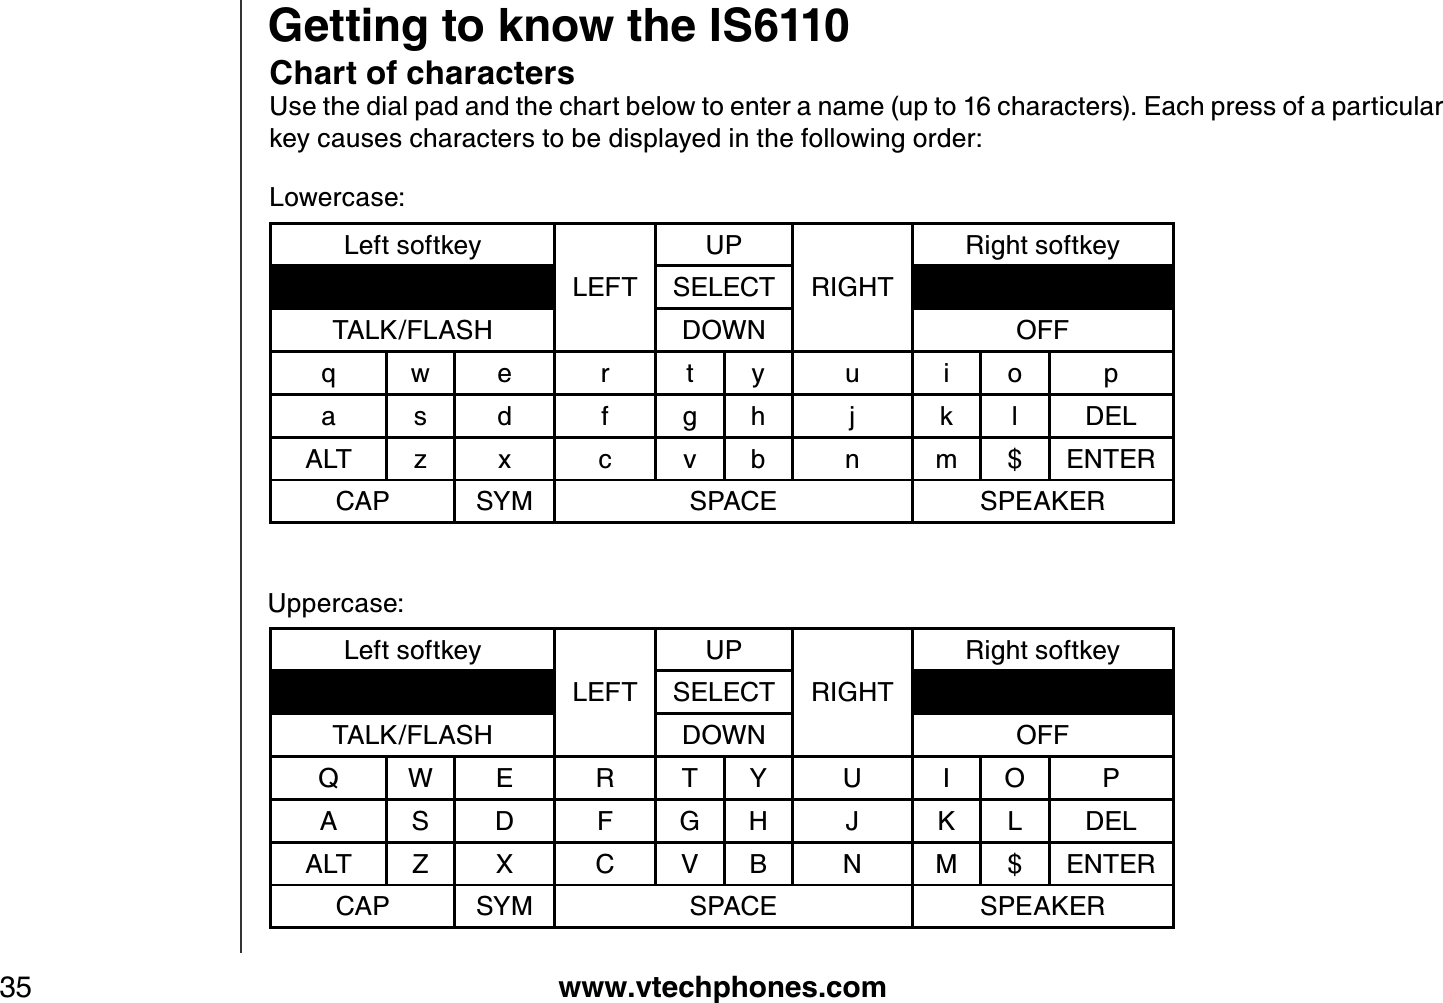 www.vtechphones.com35Getting to know the IS6110Chart of charactersUse the dial pad and the chart below to enter a name (up to 16 characters). Each press of a particular key causes characters to be displayed in the following order:Lowercase:Left softkeyLEFTUPRIGHTRight softkeySELECTTALK/FLASH DOWN OFFq w e r t y u i o pa s d f g h Lk l DELALT z x c v b n m $ ENTERCAP SYM SPACE SPEAKERLeft softkeyLEFTUPRIGHTRight softkeySELECTTALK/FLASH DOWN OFFQ W E R T Y U I O PA S D F G H J K L DELALT Z X C V B N M $ ENTERCAP SYM SPACE SPEAKERUppercase: